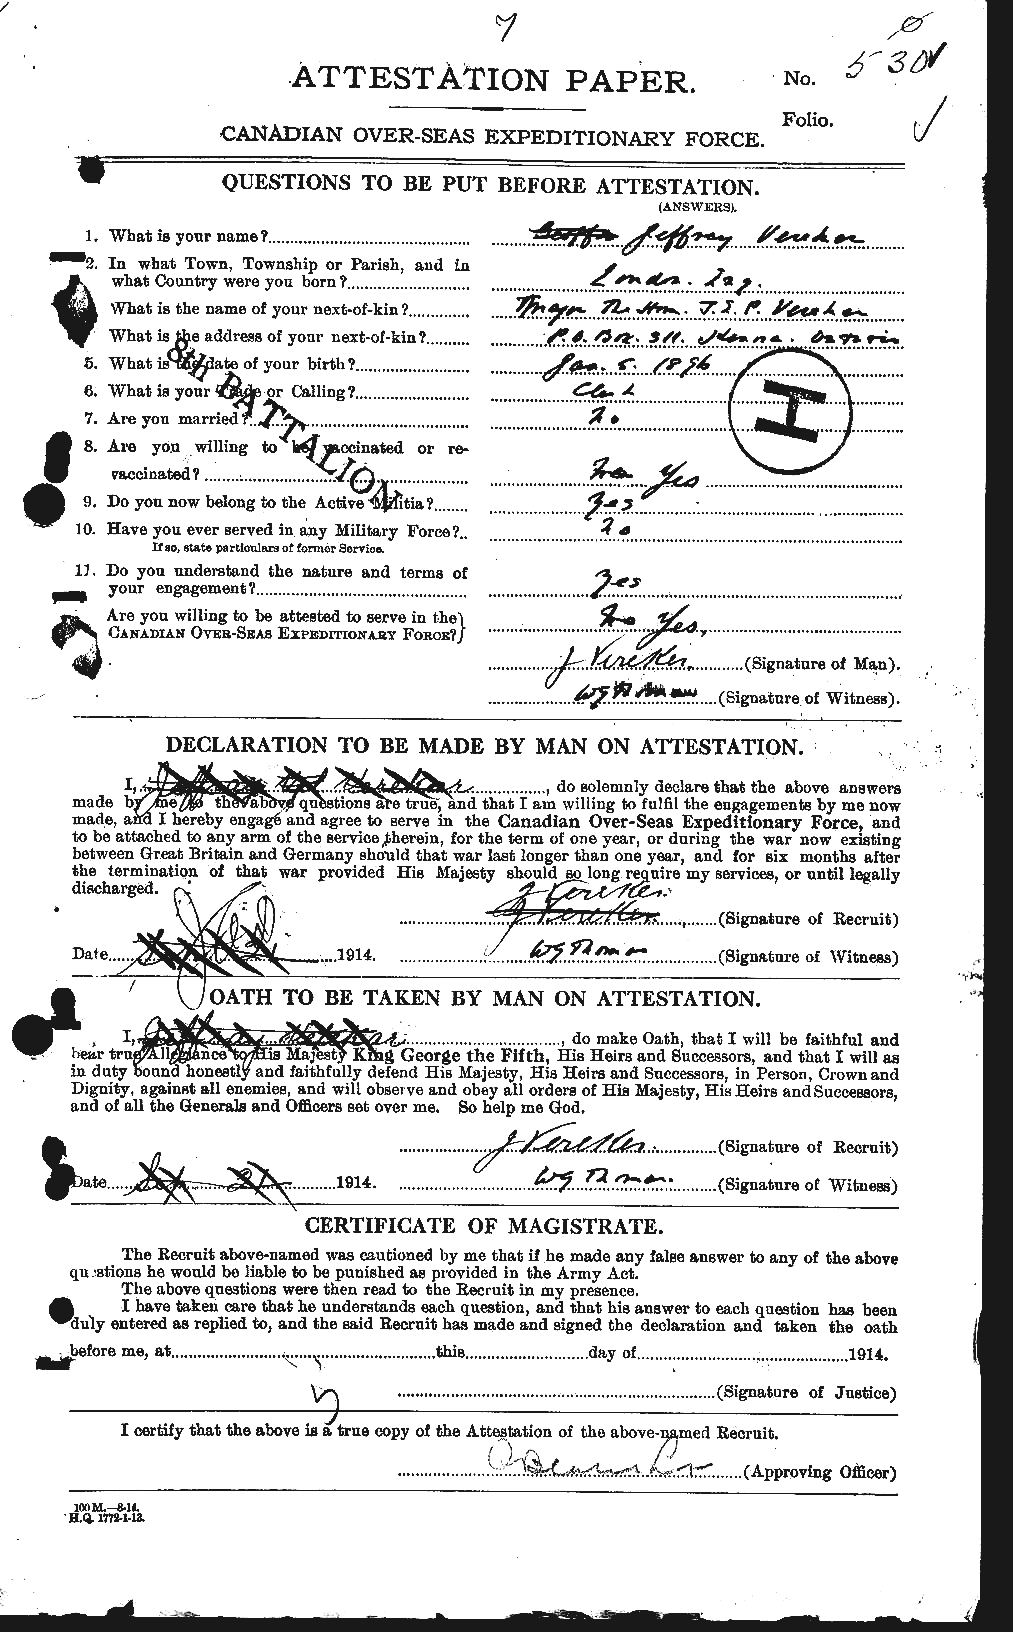 Personnel Records of the First World War - CEF 649445a